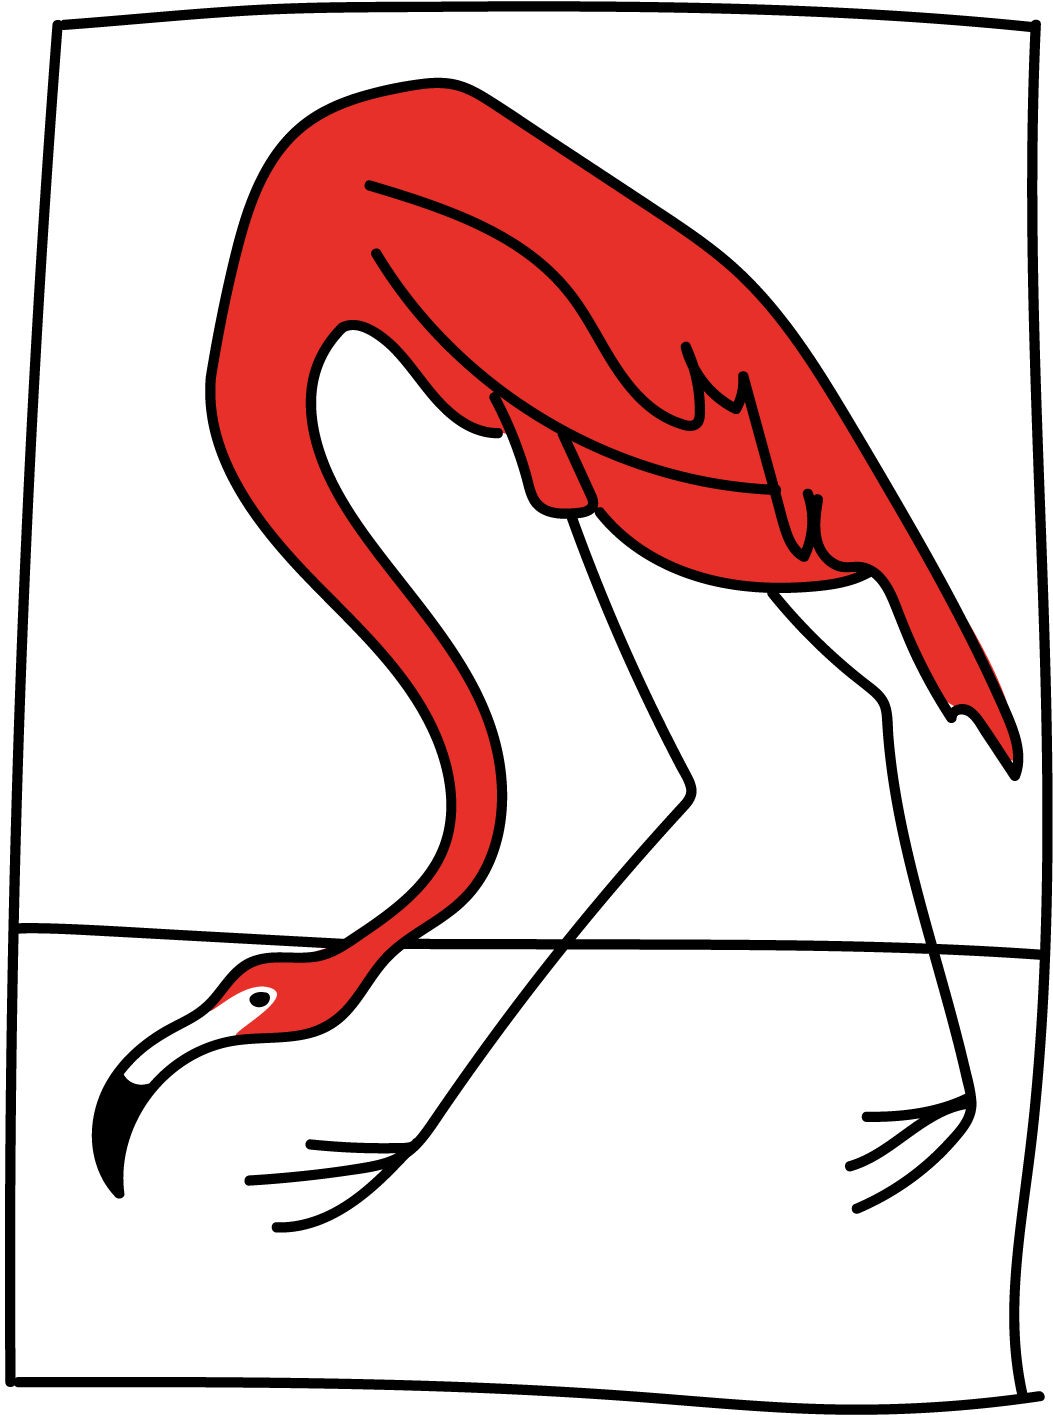 An illustration of a red flamingo